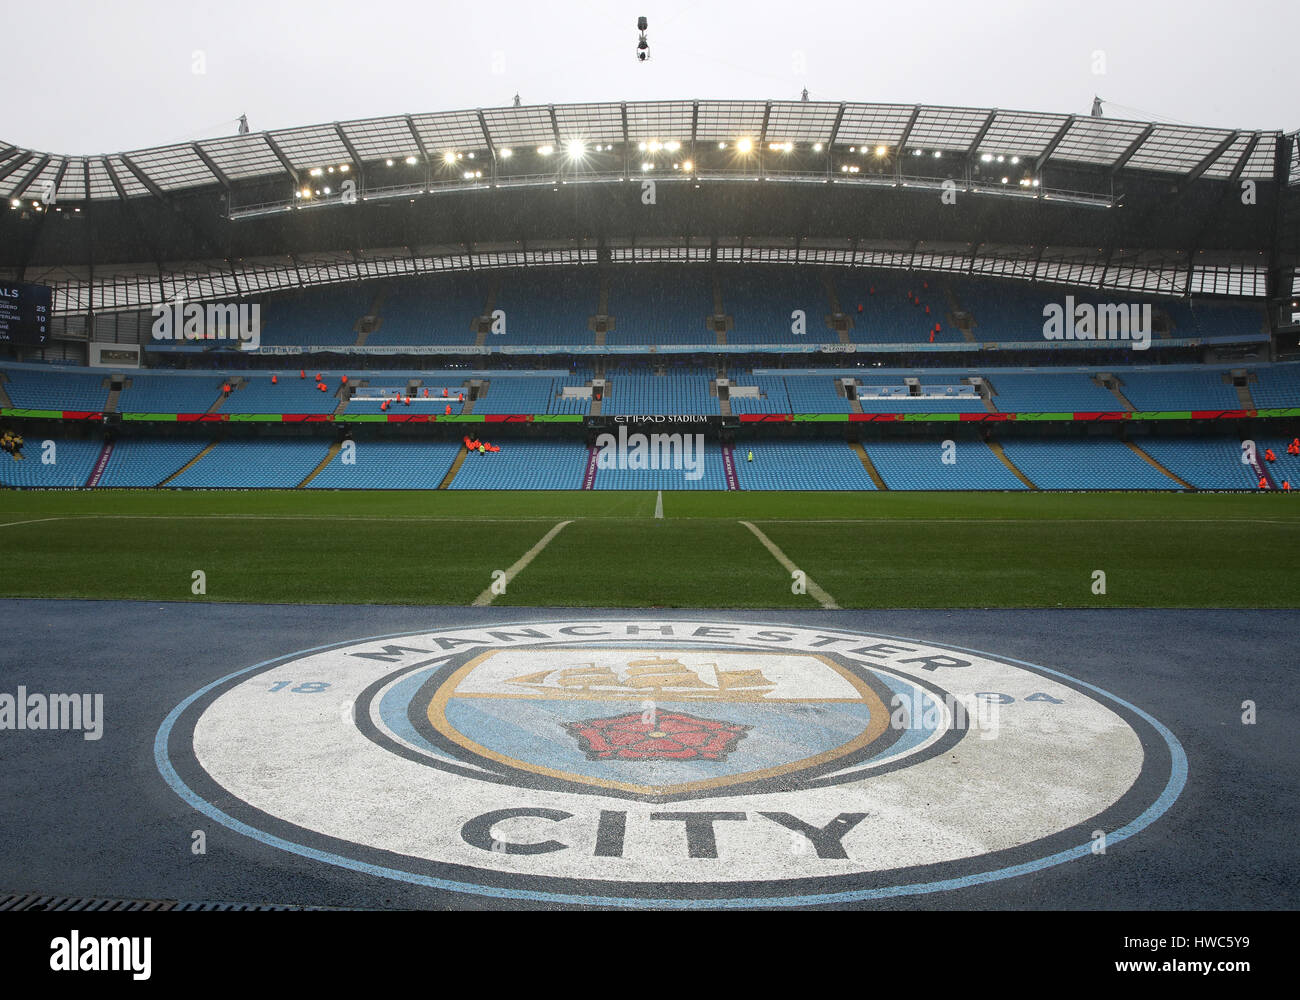 The Spidercam is set up prior to the Premier League match at the Etihad Stadium, Manchester. Stock Photo